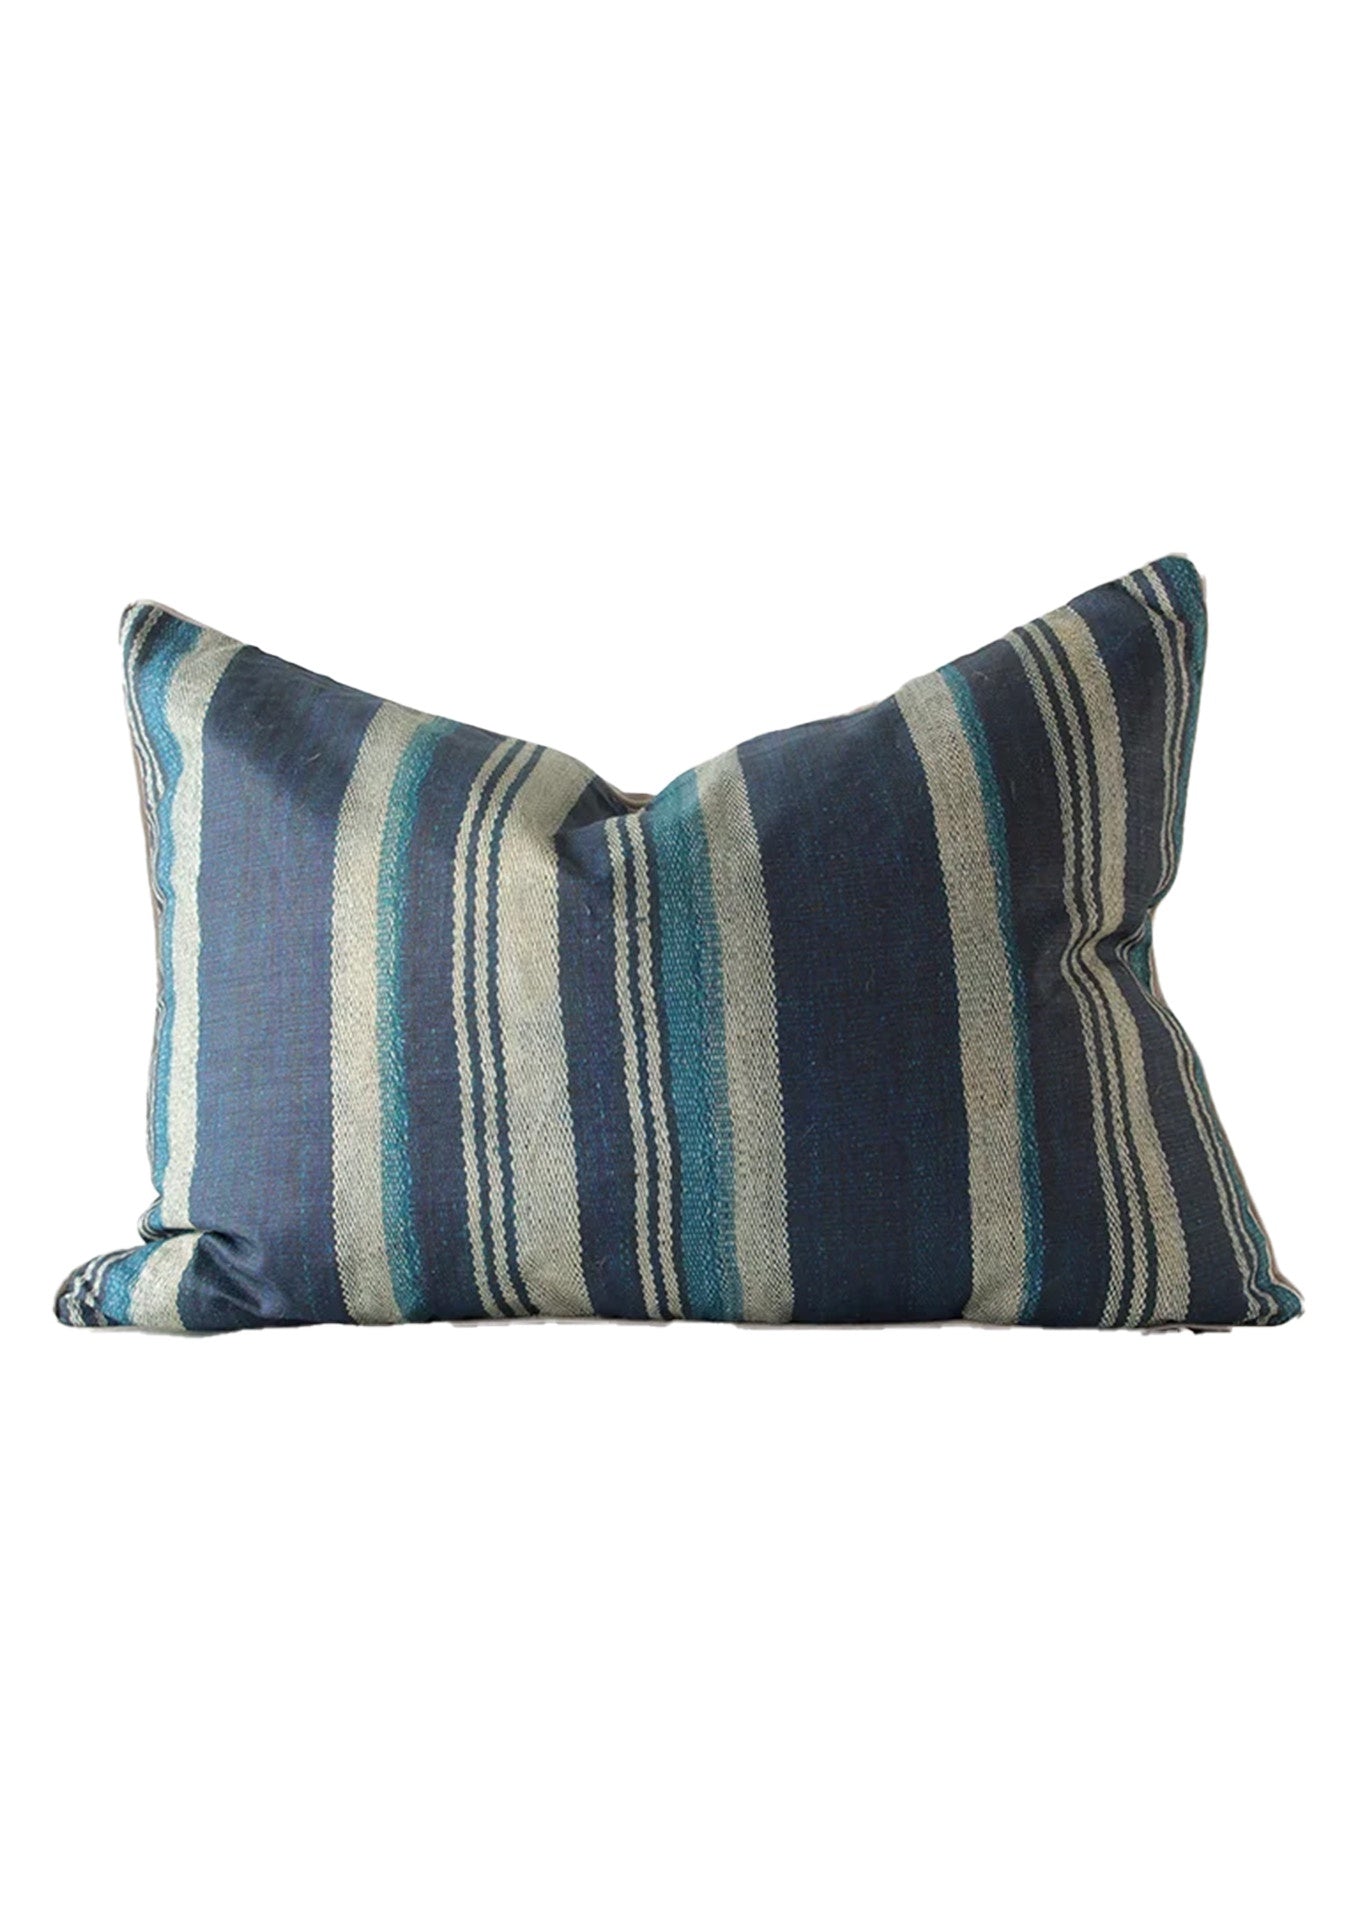 A rectangular throw pillow featuring Southwest Blue White Vertical Stripes in various shades of blue and gray, set against a white background, reminiscent of Arizona's serene style by Design Legacy.